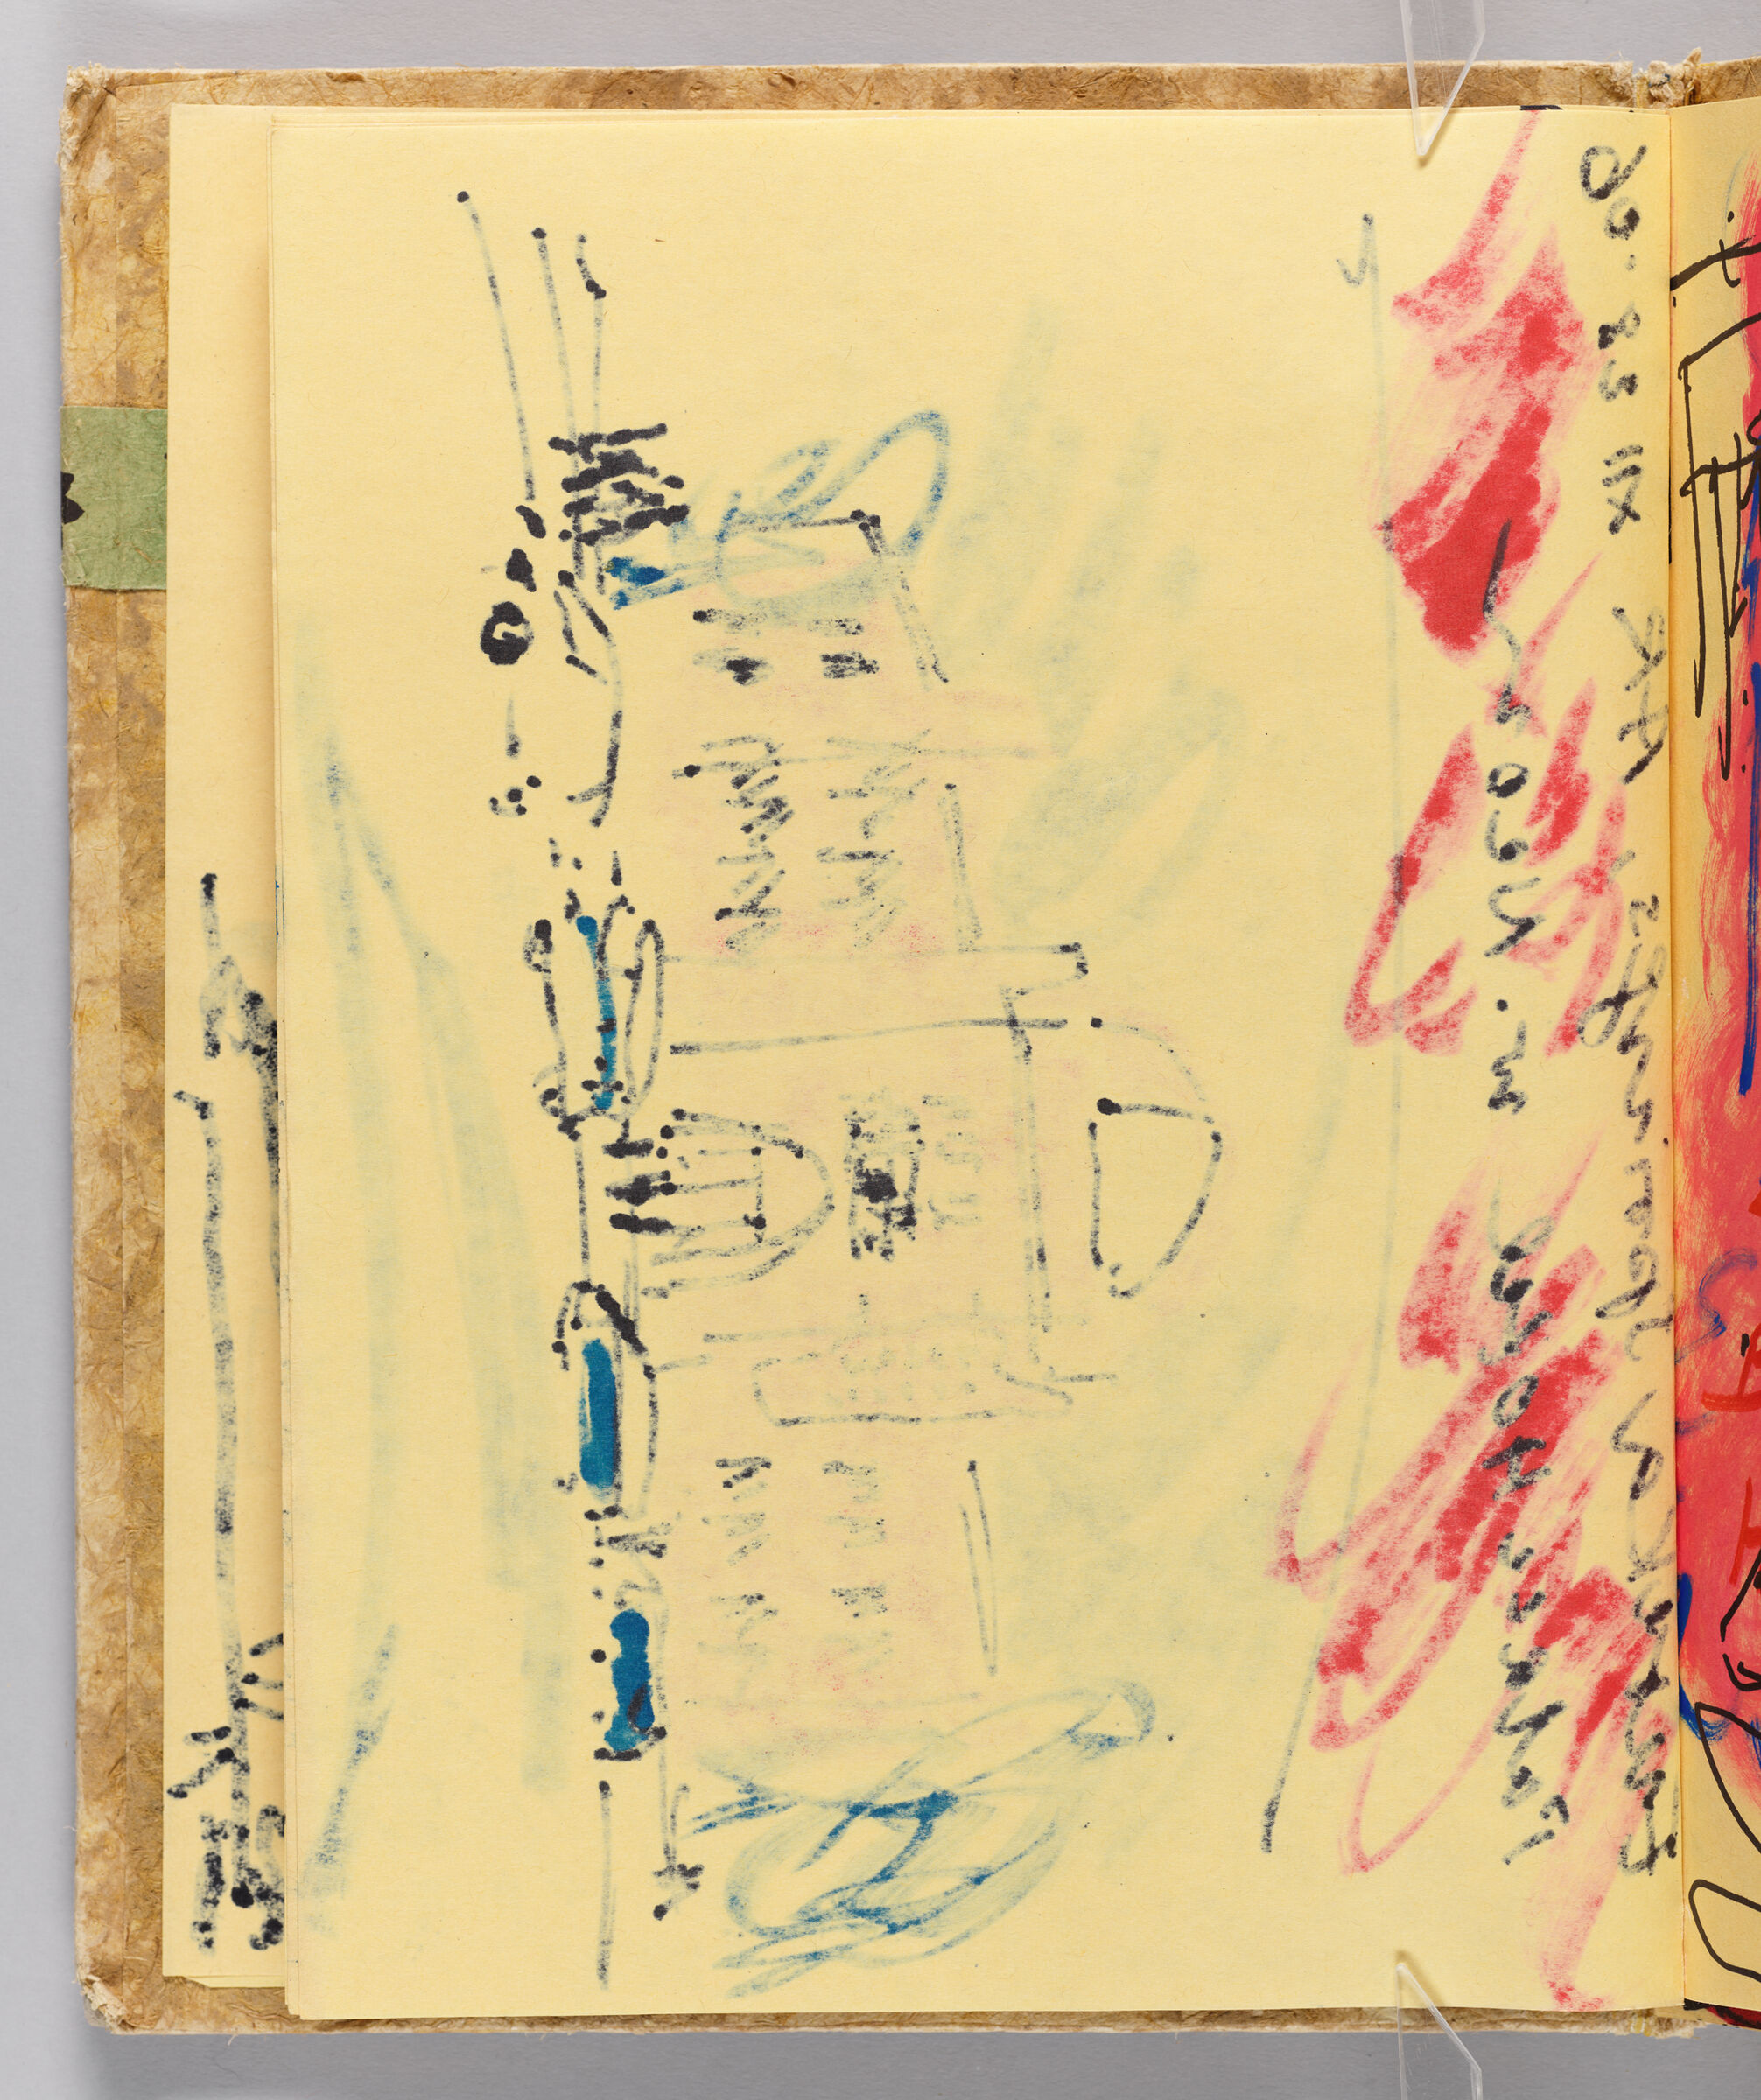 Untitled (Bleed-Through Of Previous Page, Left Page); Untitled (Palace Hotel And Bath House, Right Page)